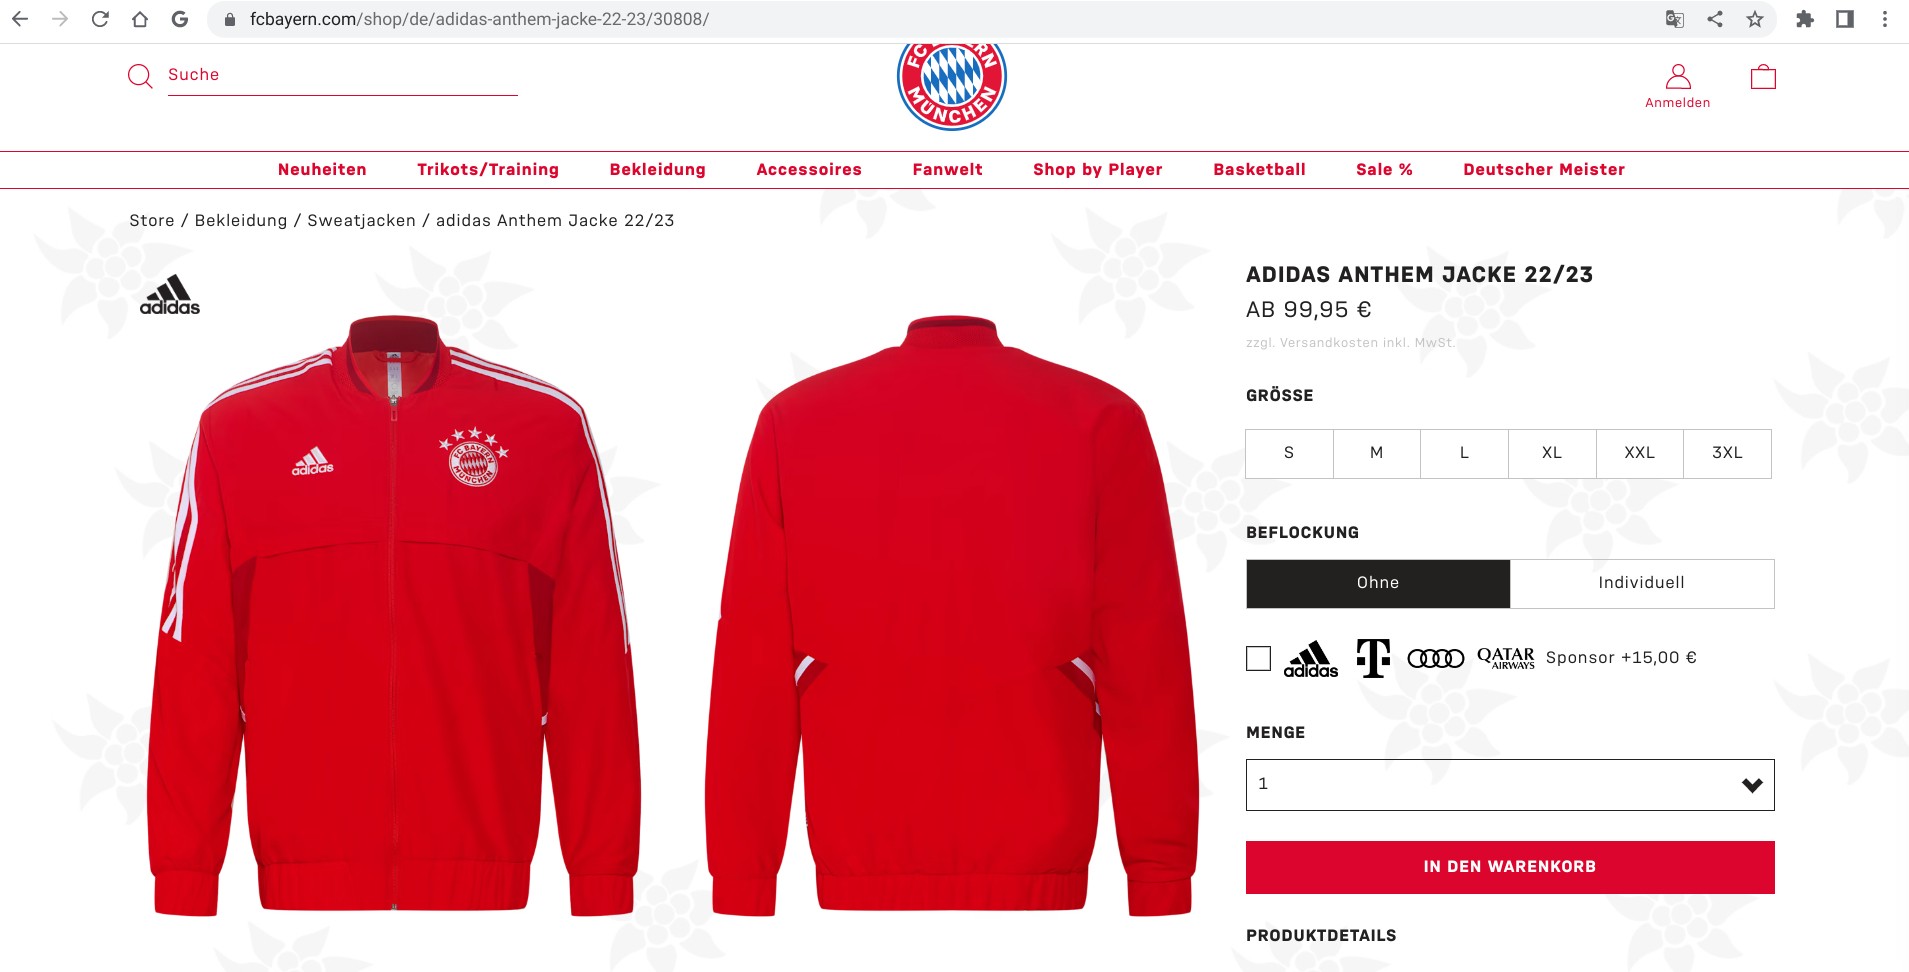 Screenshot of a listing from fcbayern.com